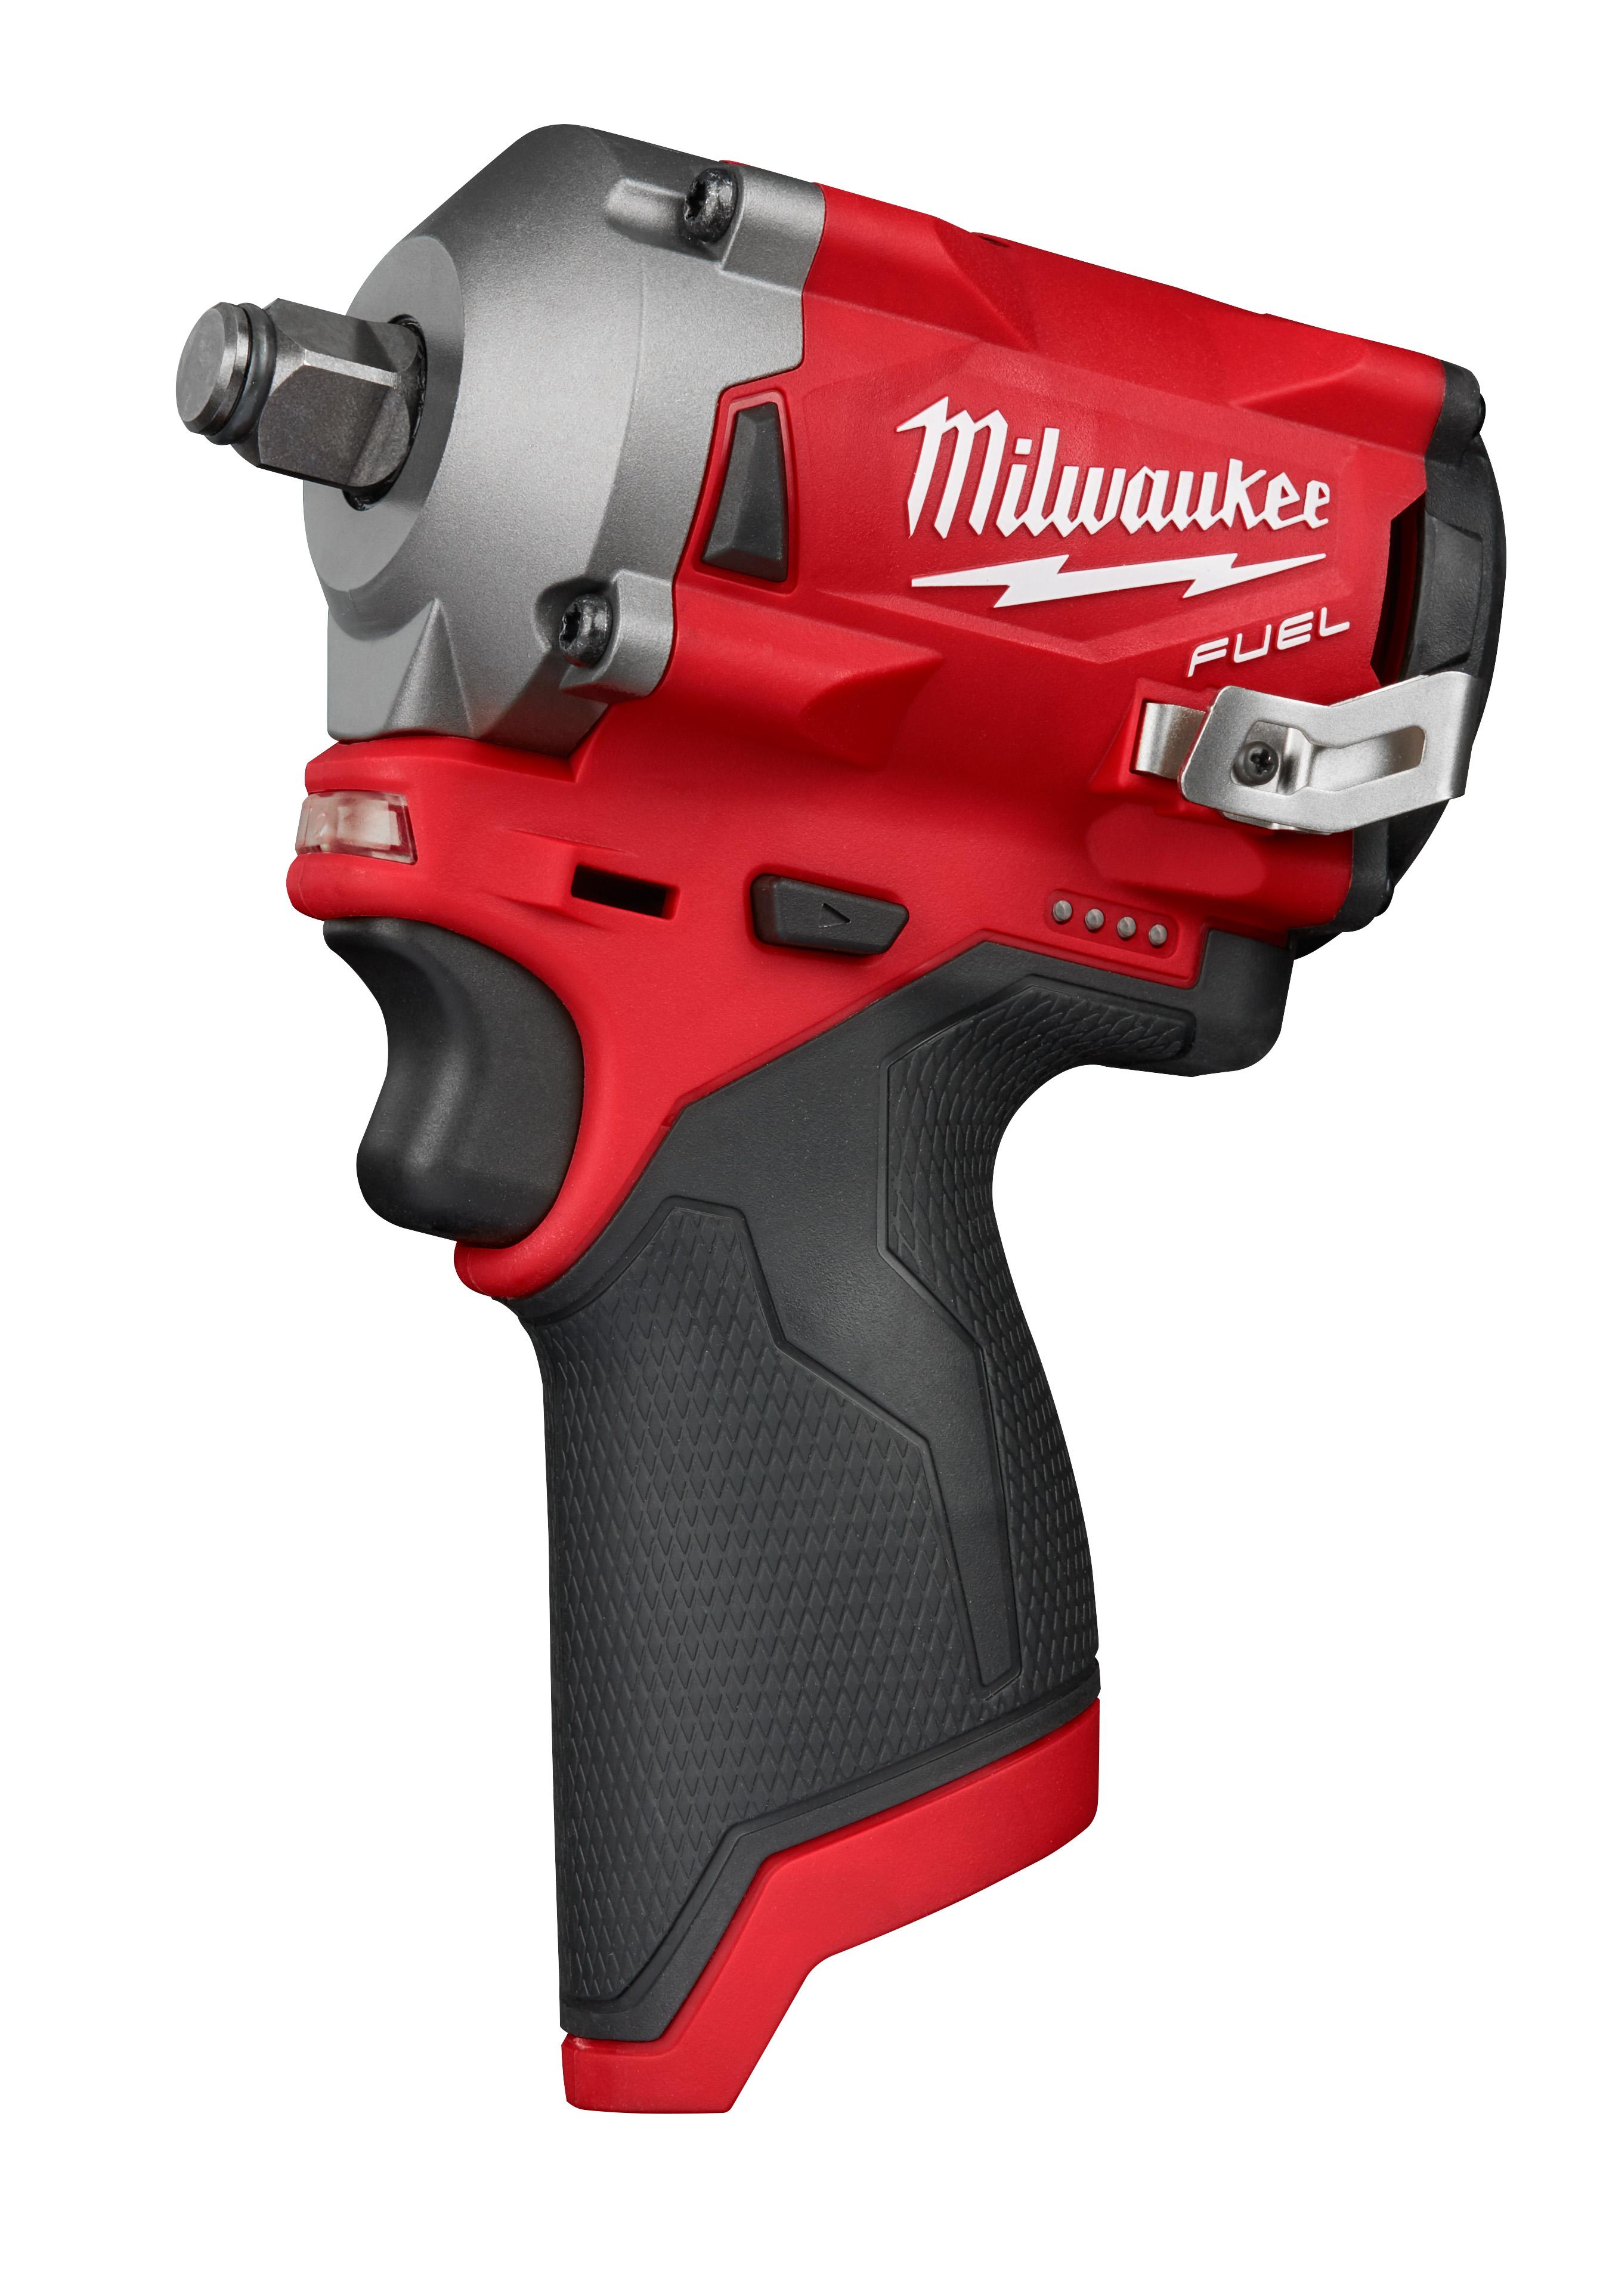 Milwaukee® M12™ 2554-22 Stubby Cordless Impact Wrench Kit, 3/8 in Straight Drive, 3200 bpm, 250 ft-lb Torque, 12 VDC, 4.8 in OAL